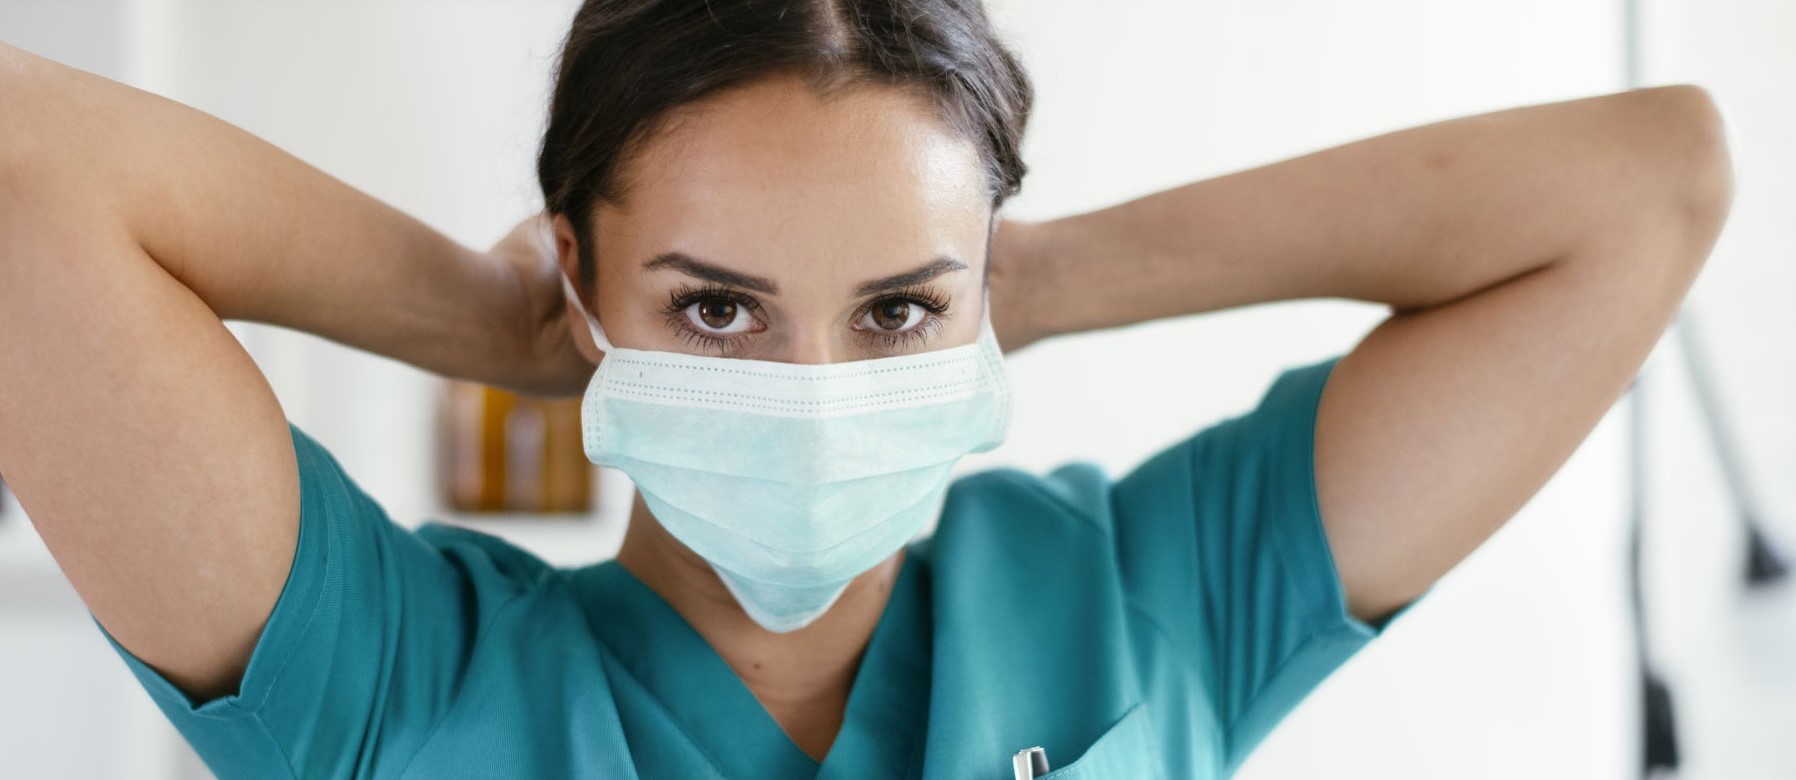 A female licensed practical nurse is wearing scrubs and a mask